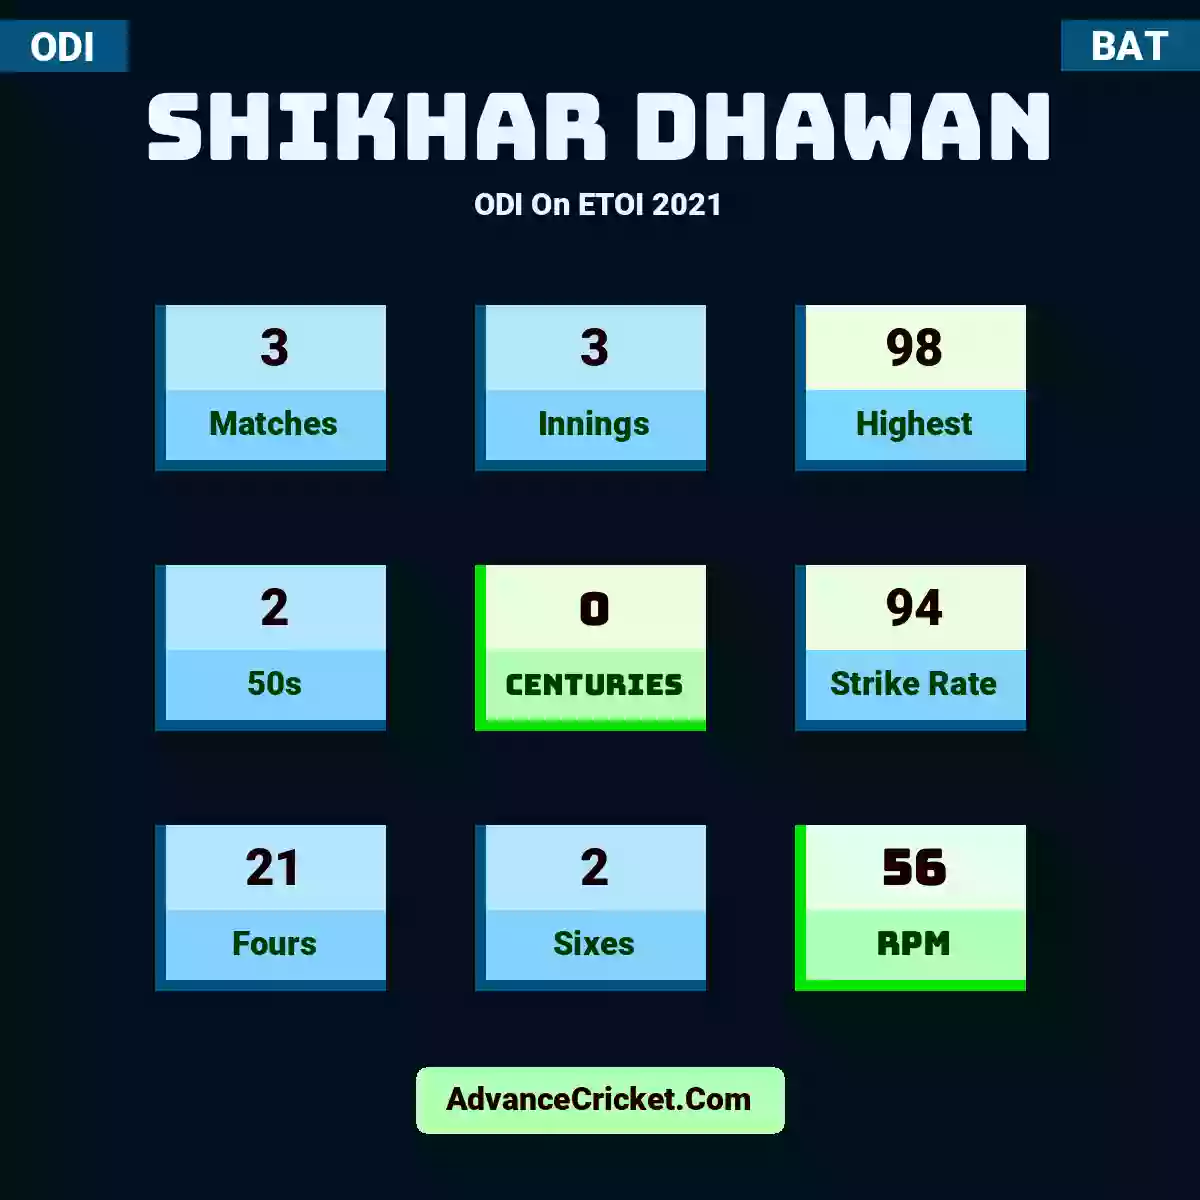 Shikhar Dhawan ODI  On ETOI 2021, Shikhar Dhawan played 3 matches, scored 98 runs as highest, 2 half-centuries, and 0 centuries, with a strike rate of 94. S.Dhawan hit 21 fours and 2 sixes, with an RPM of 56.